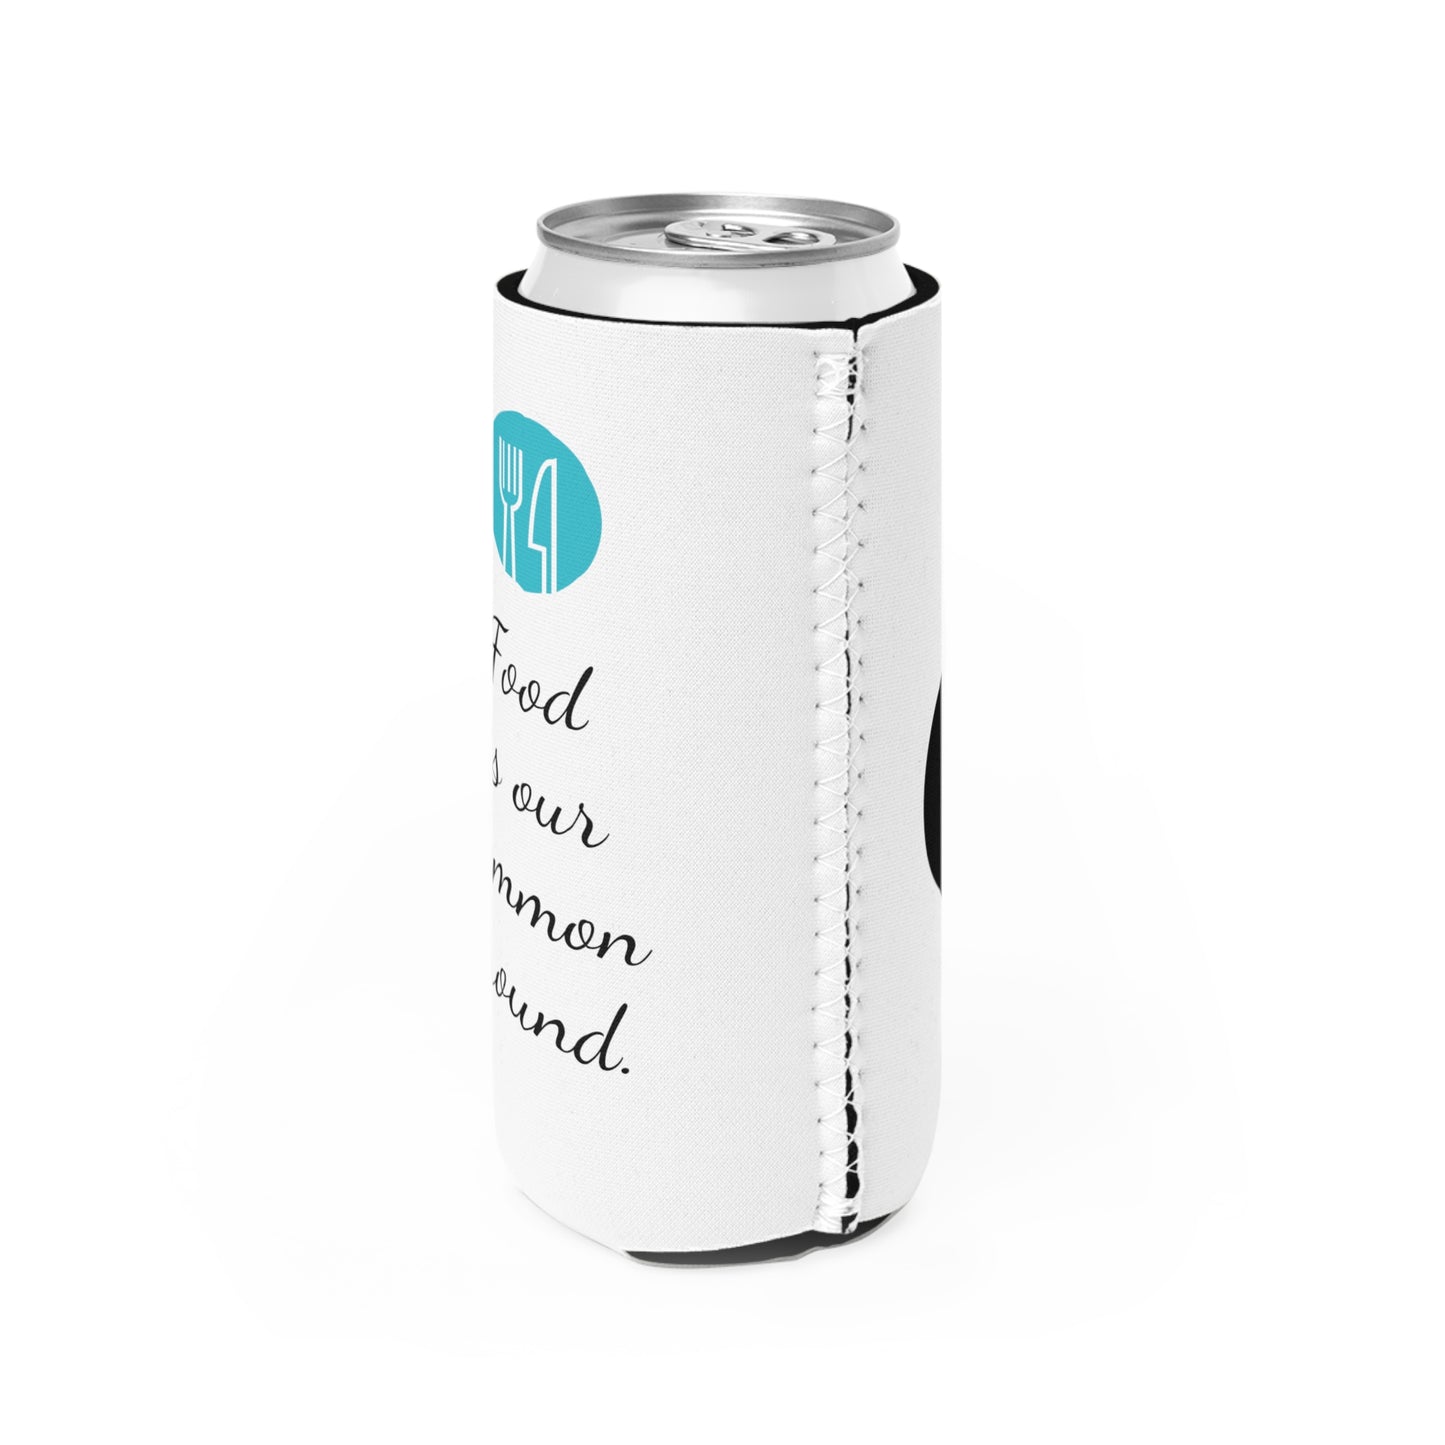 Slim Can Cooler - Food is our common ground